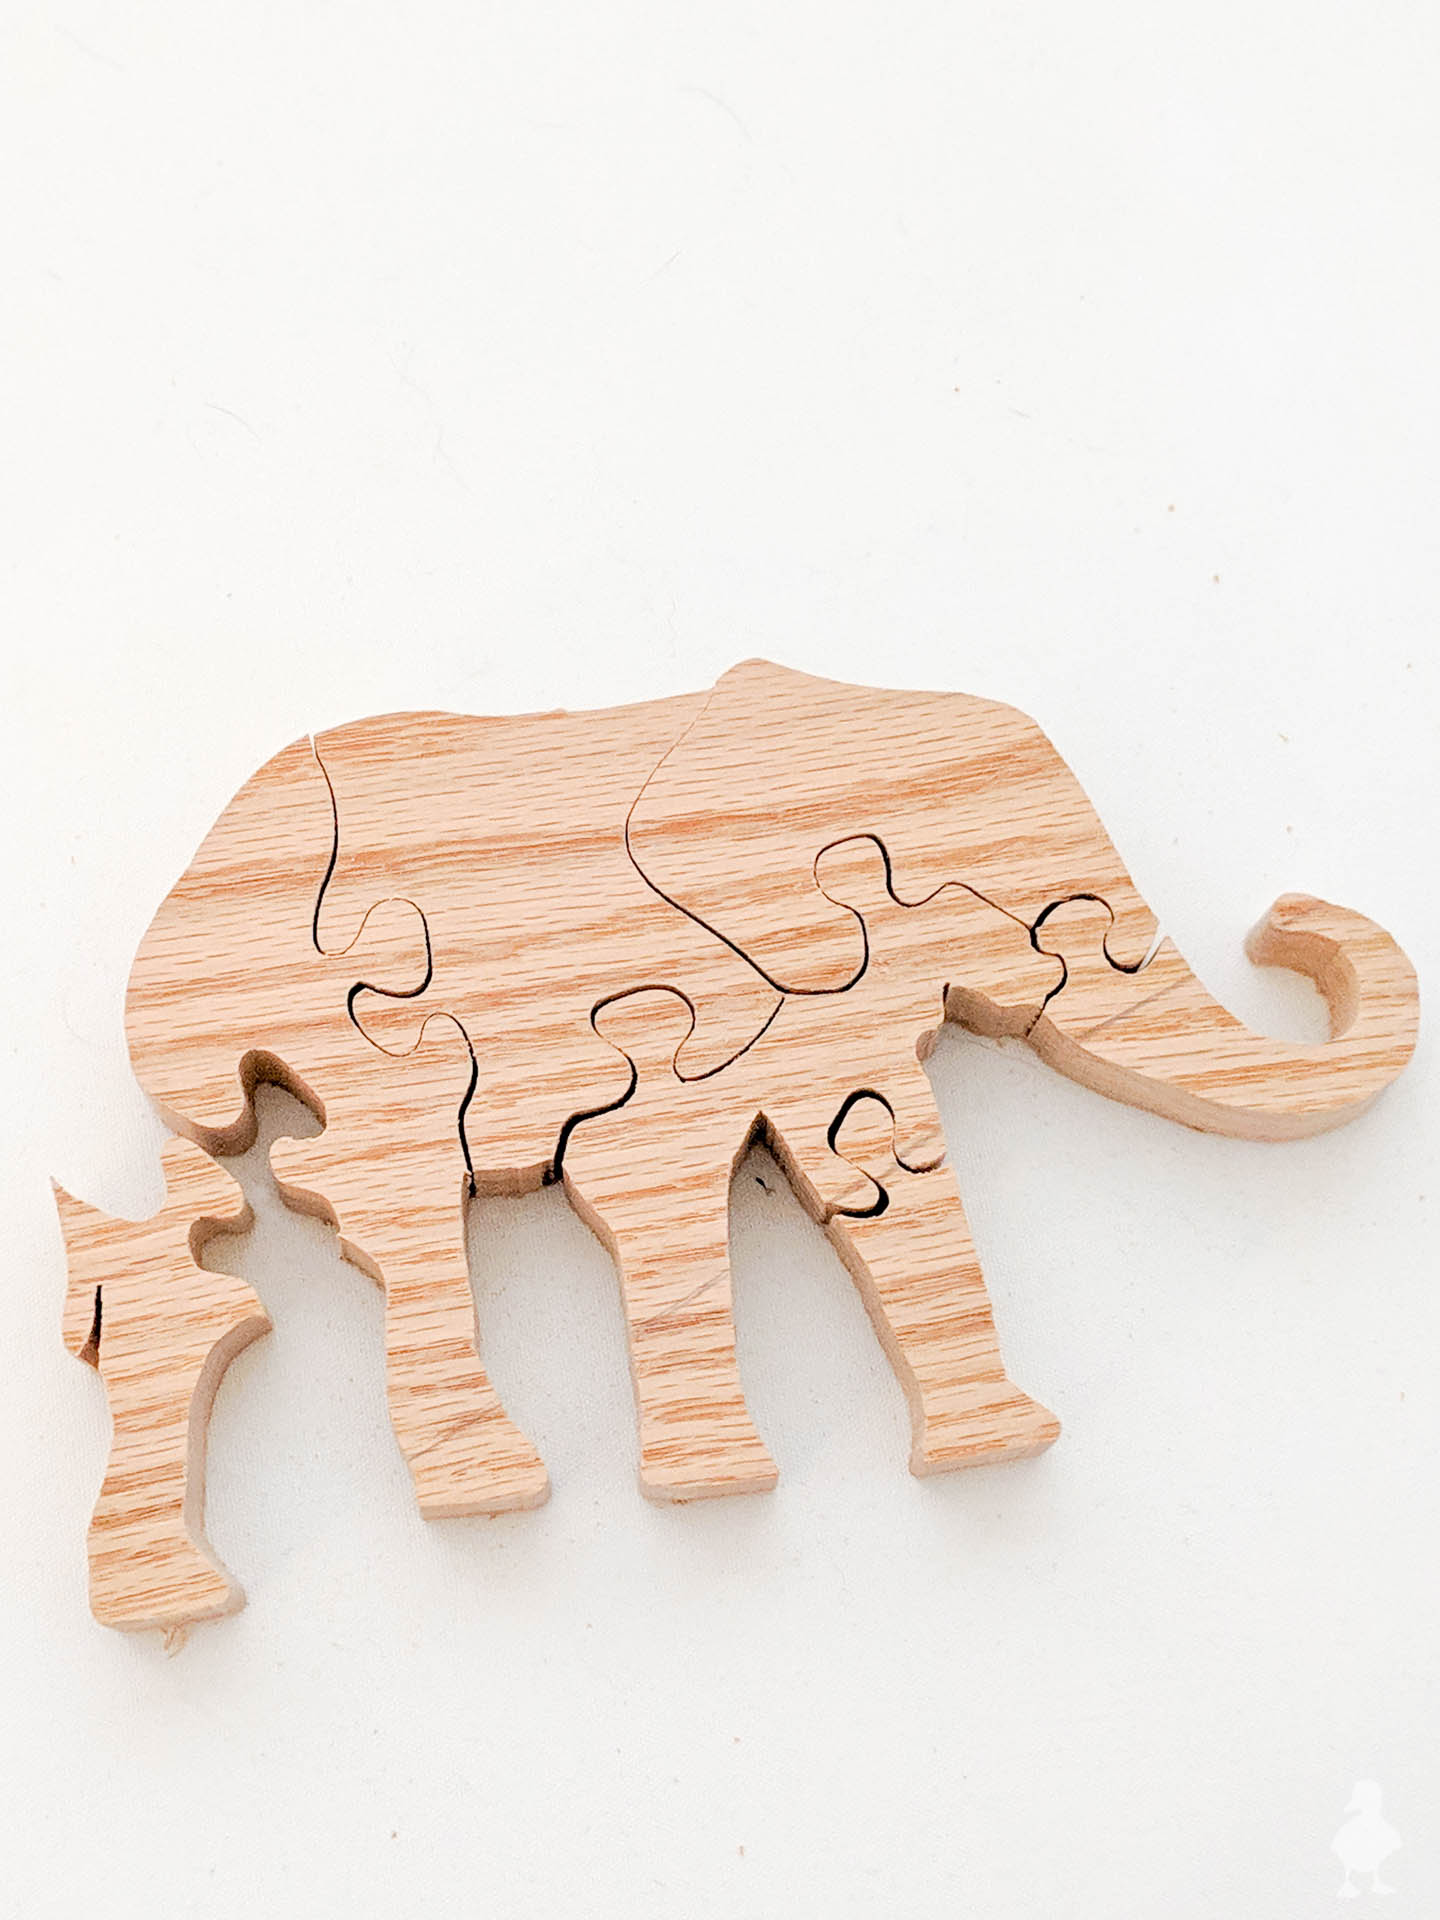 How to Glue a Wooden Puzzle ?